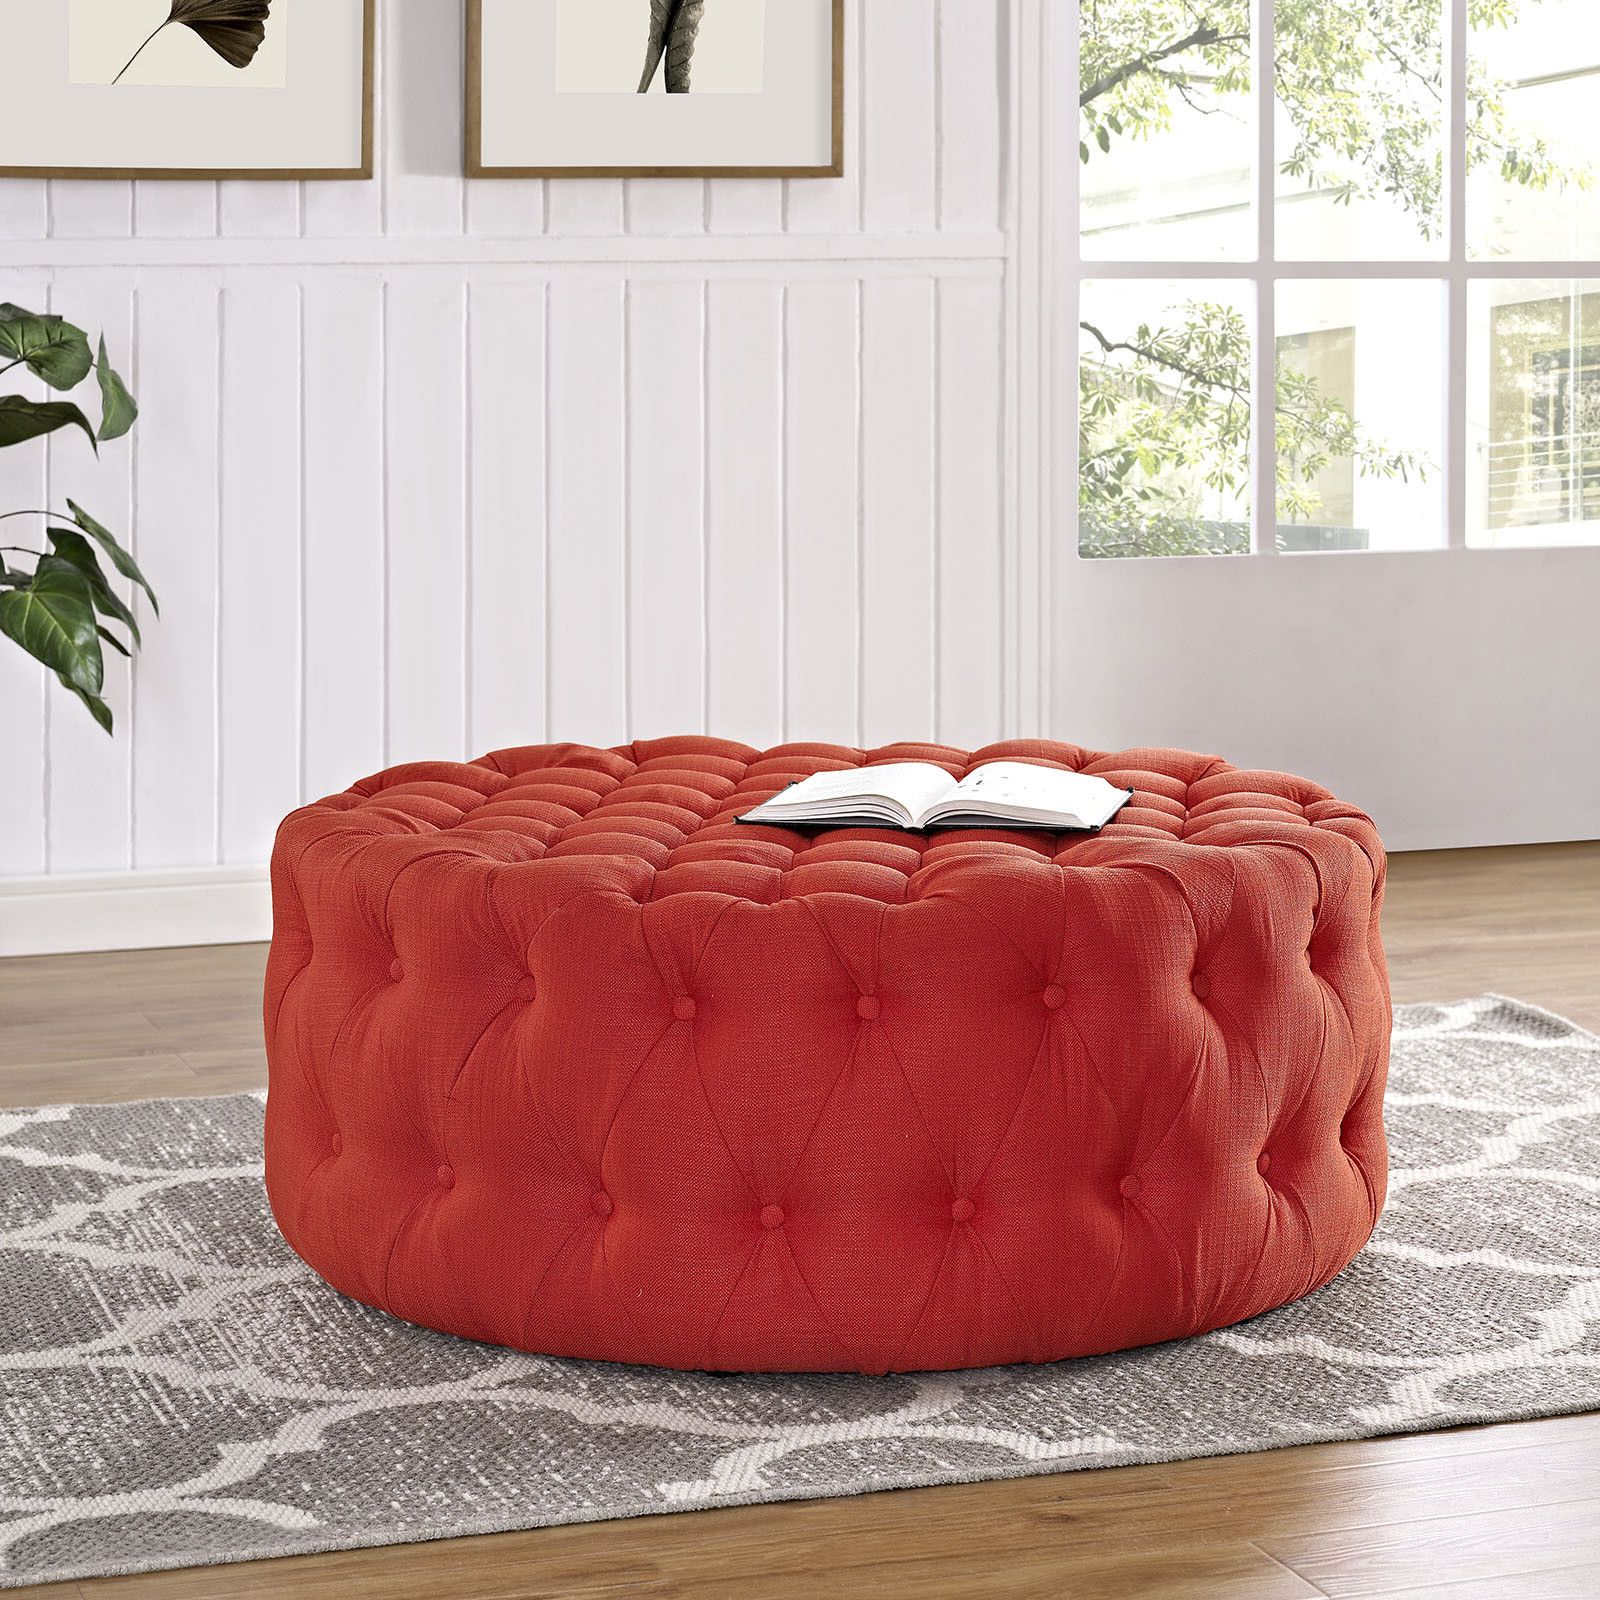 Widely Used Round Black Tasseled Ottomans Regarding Button Tufted Fabric Upholstered Round Ottoman In Atomic Red (View 4 of 10)